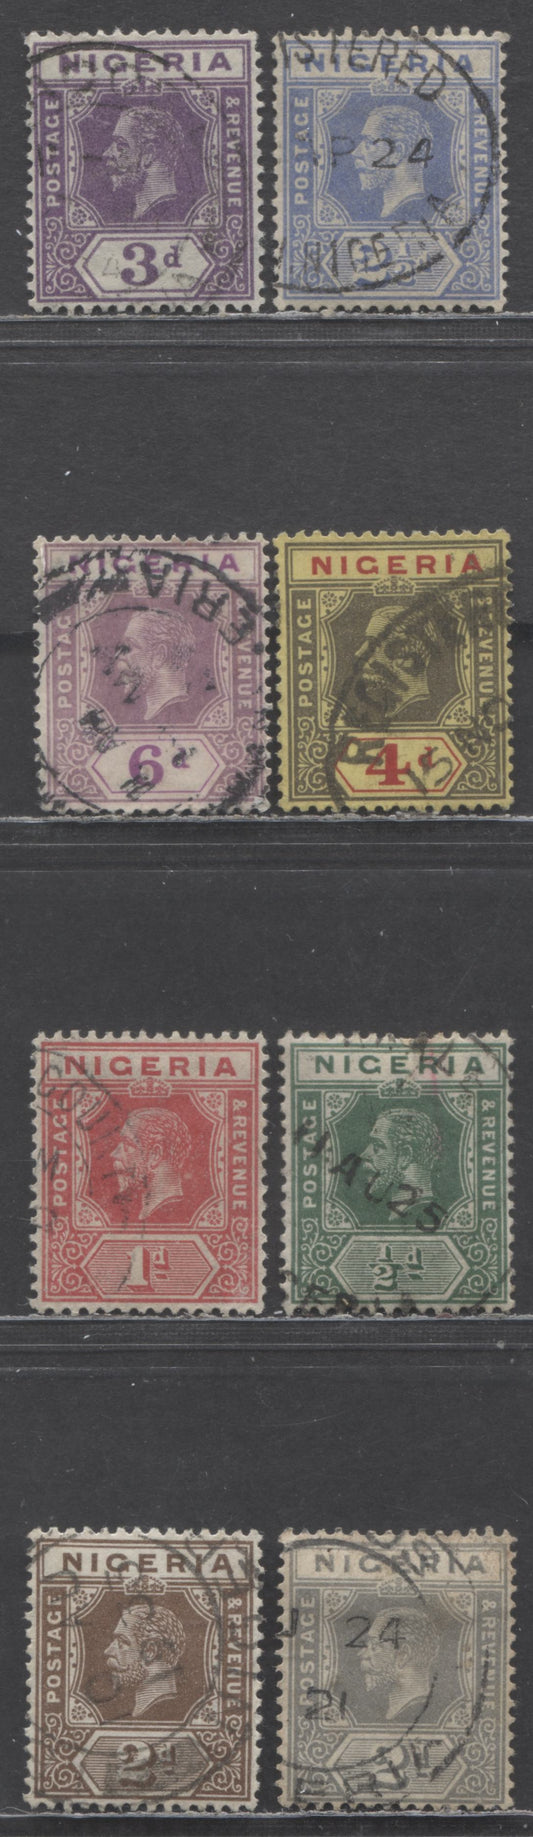 Nigeria SC#18a/28a 1921-1933 King George V Imperium Keyplates, All Die 1, Script CA Wmk, 8 Fine/Very Fine Used Singles, Click on Listing to See ALL Pictures, Estimated Value $45